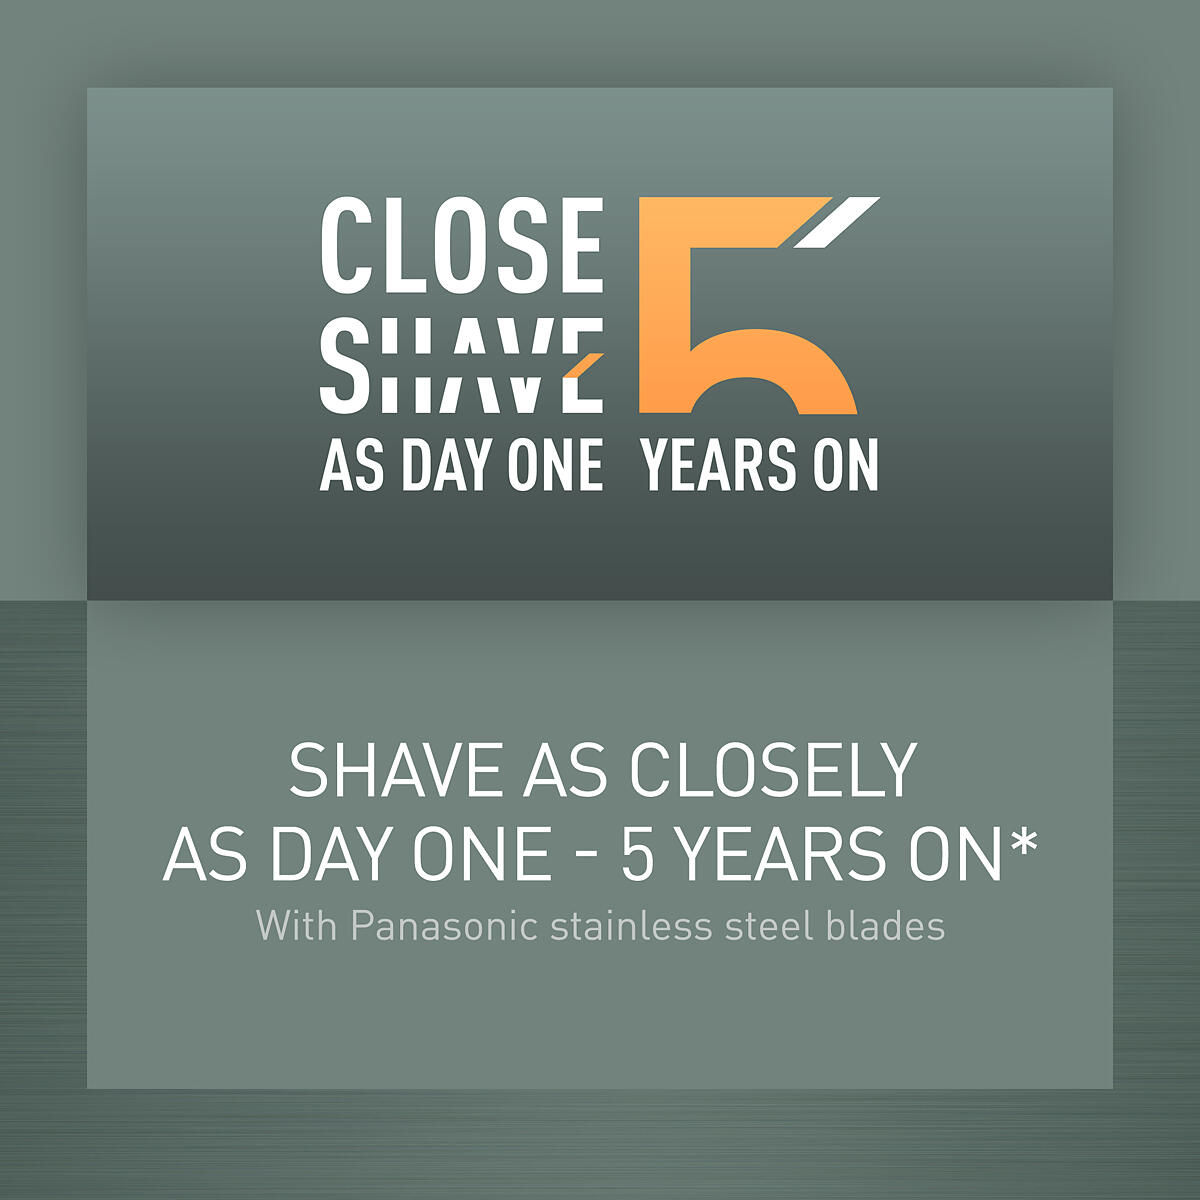 CLOSE SHAVE AS DAY ONE - 5 YEARS ON*